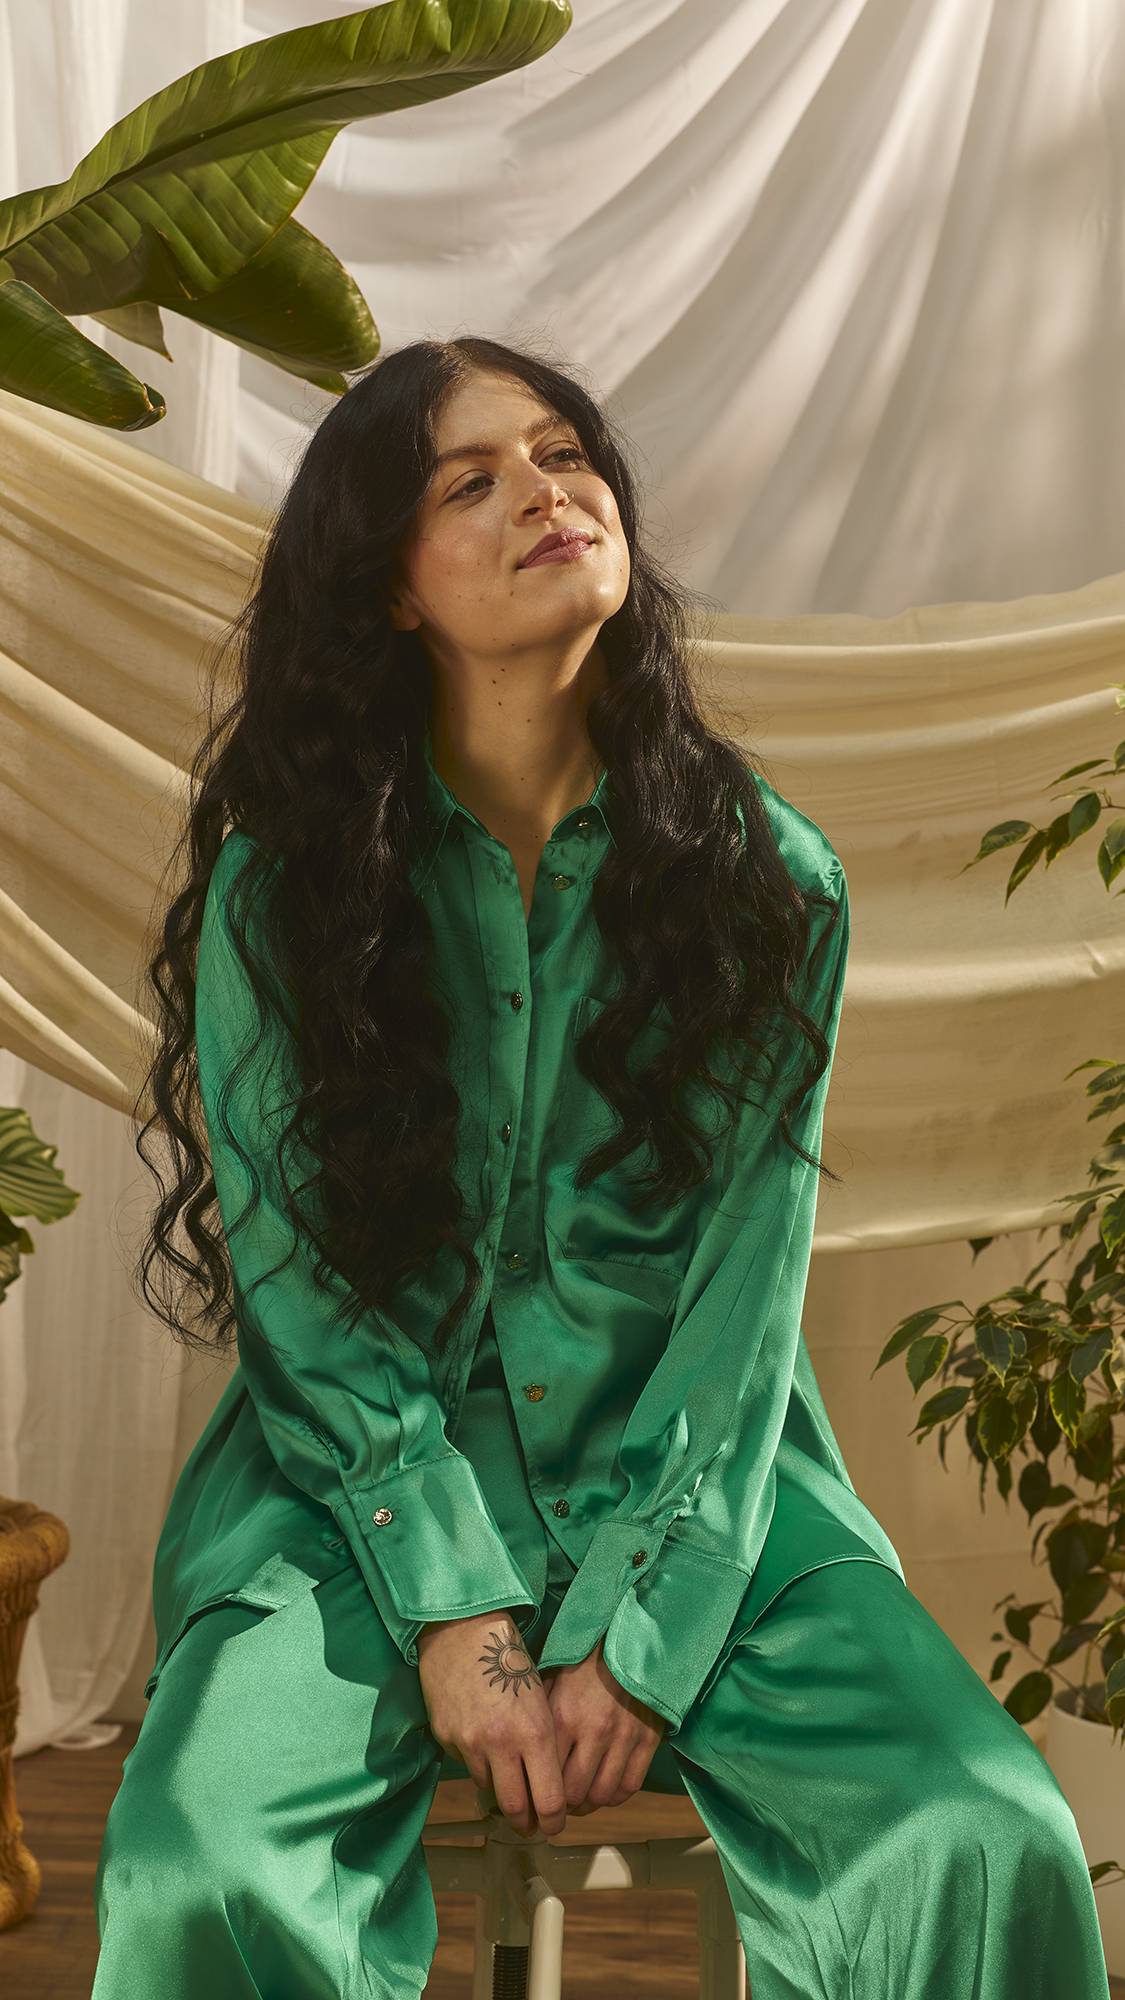 The image shows the model is long, emerald-green satin pyjamas. They are sat on a stool with a plant behind them as their long, dark, wavy hair drapes over their shoulders. 